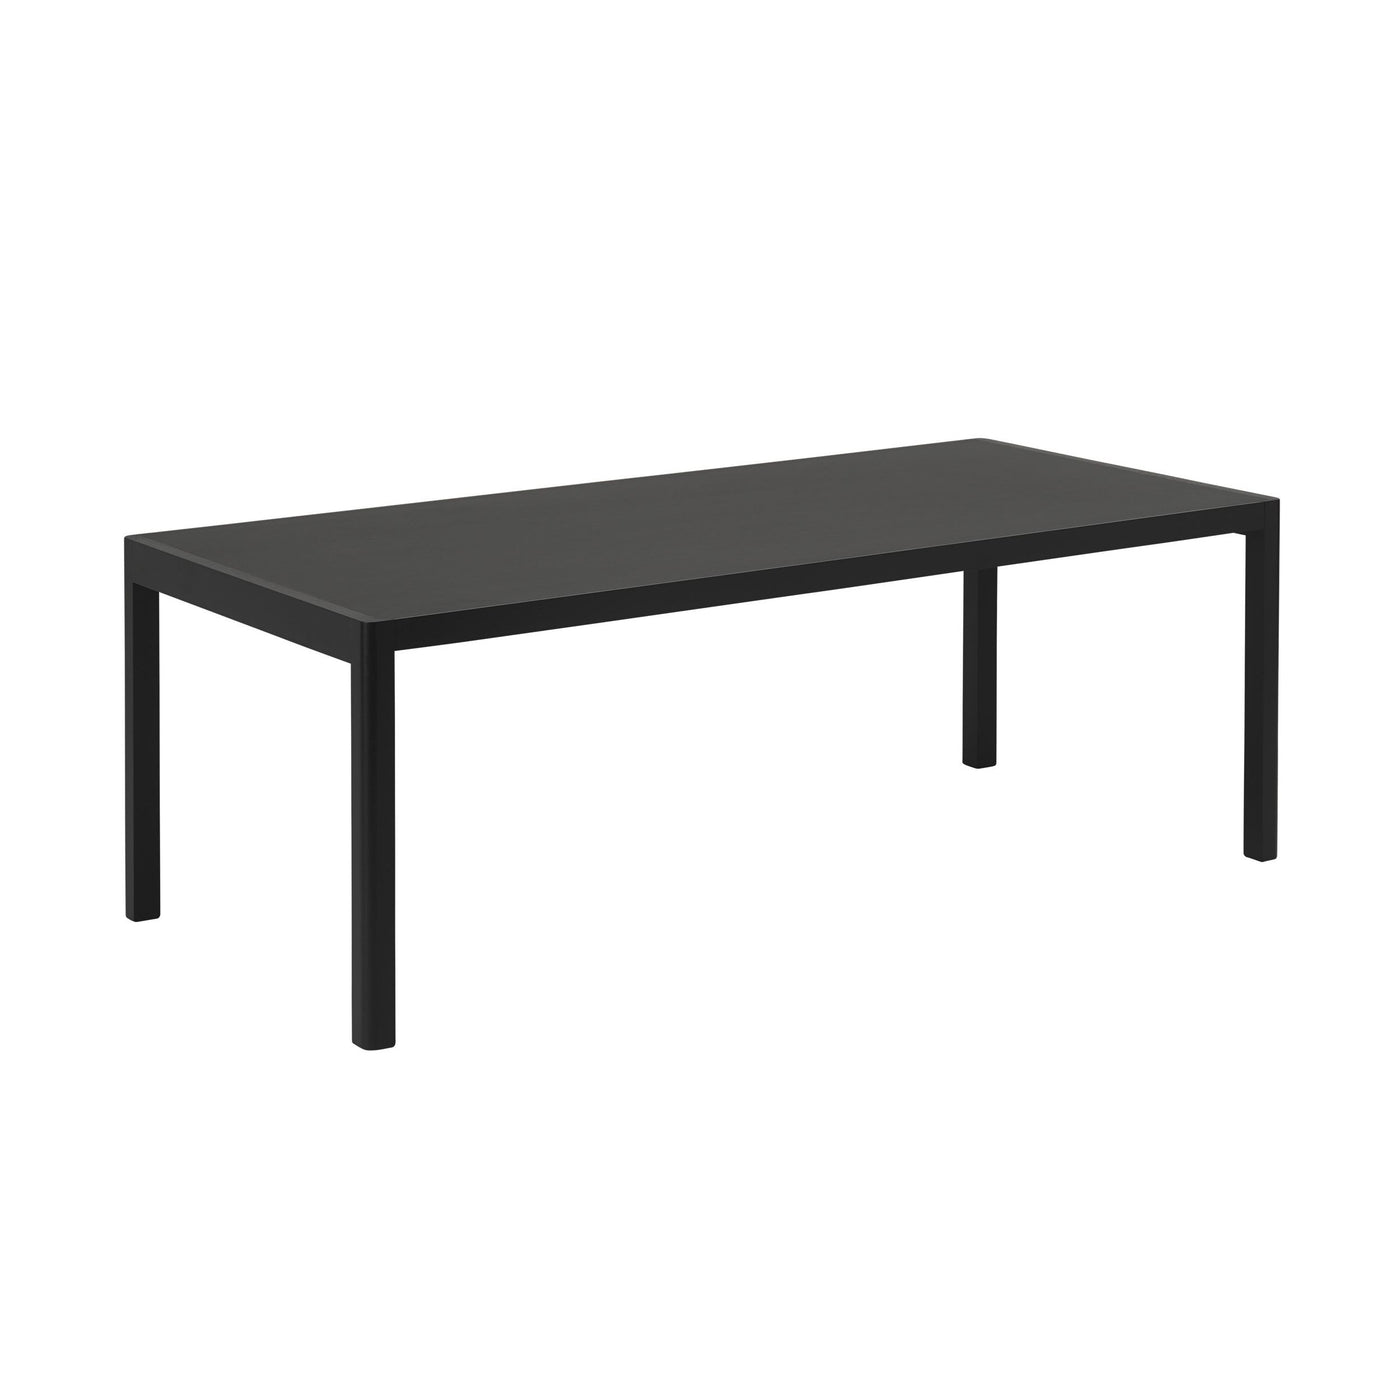 Muuto Workshop Table in black 92x200. Shop online at someday designs. #size_92x200